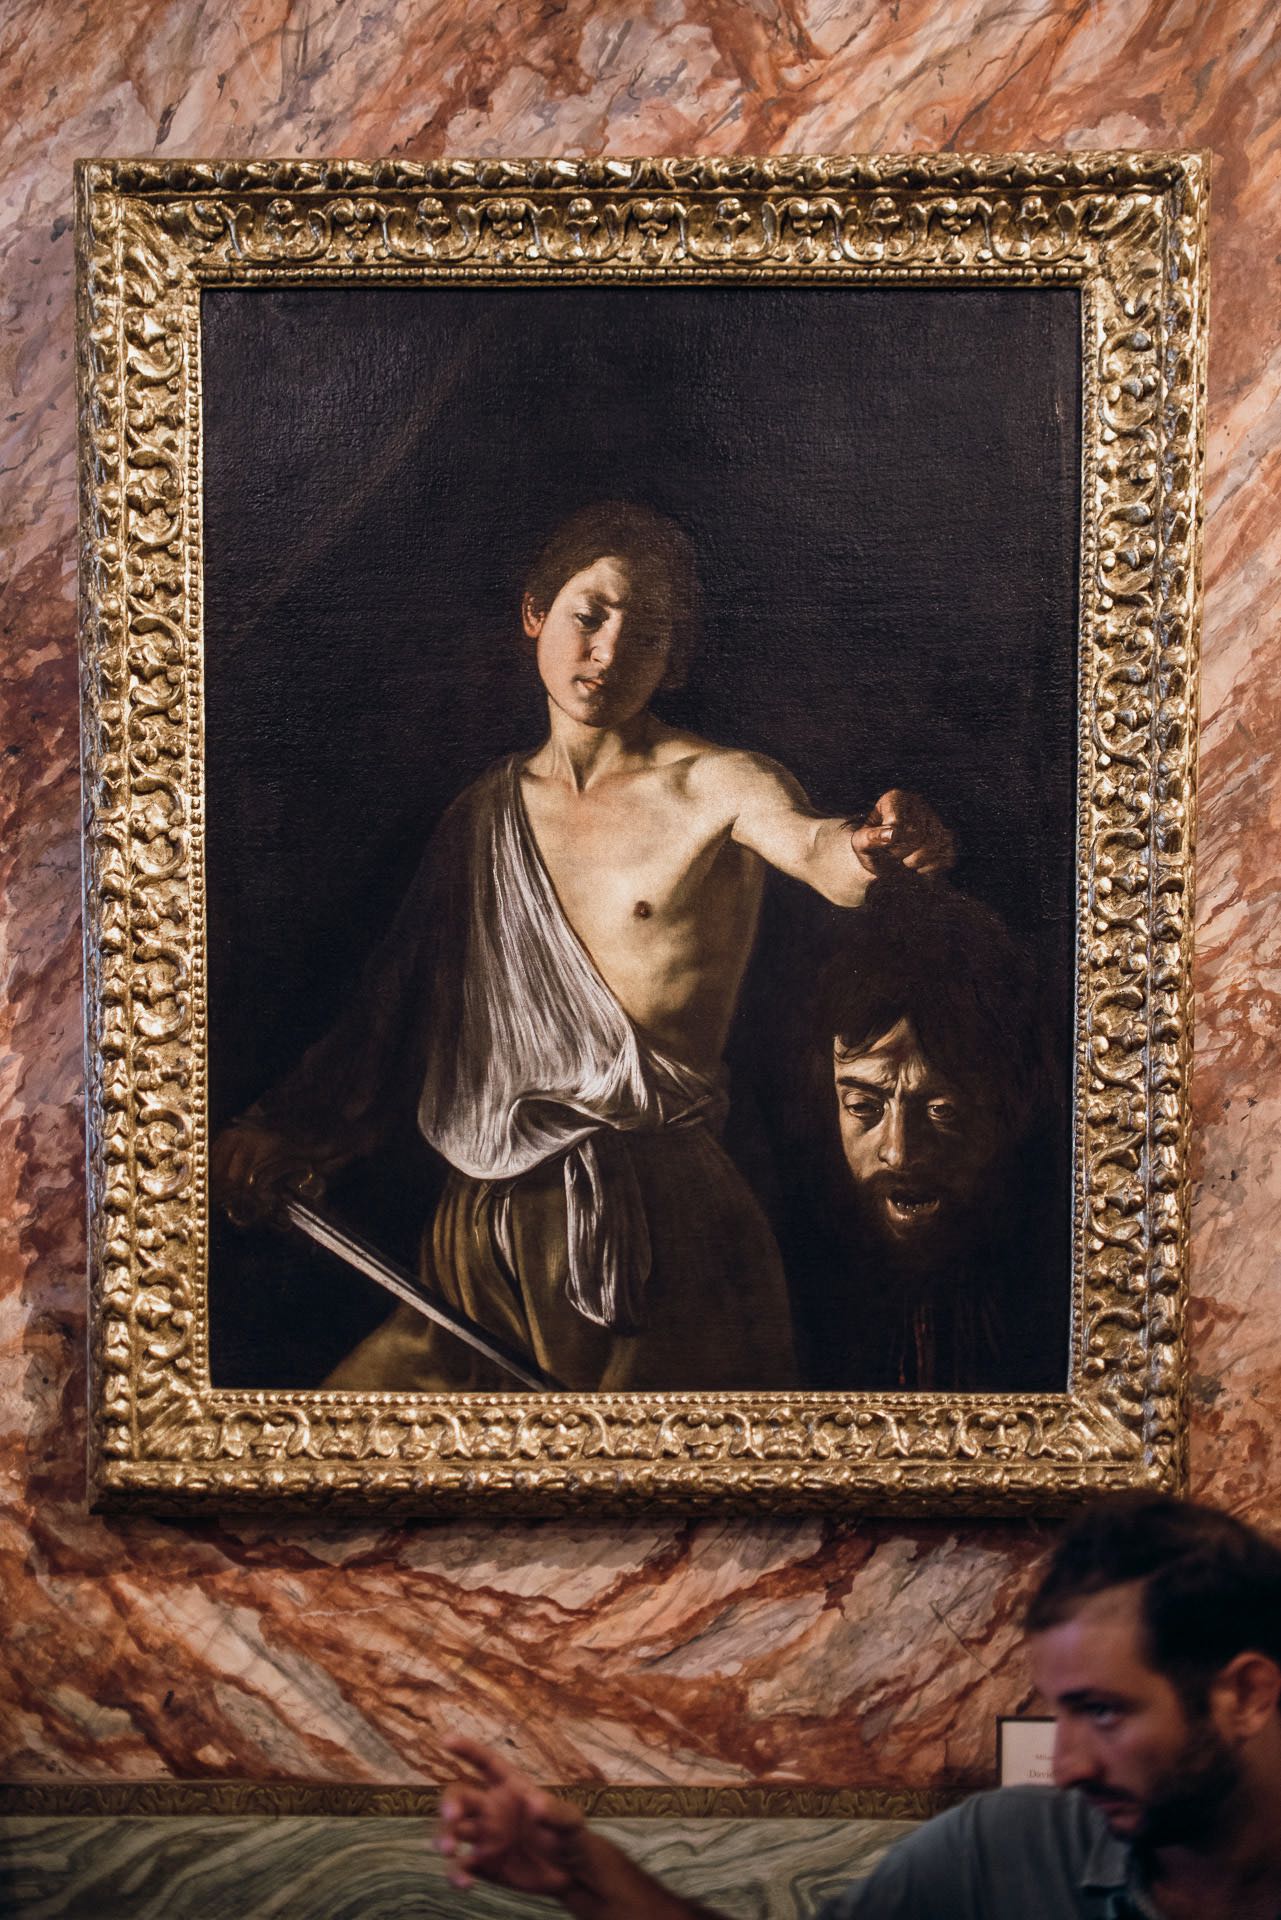 A painting of a man holding a head